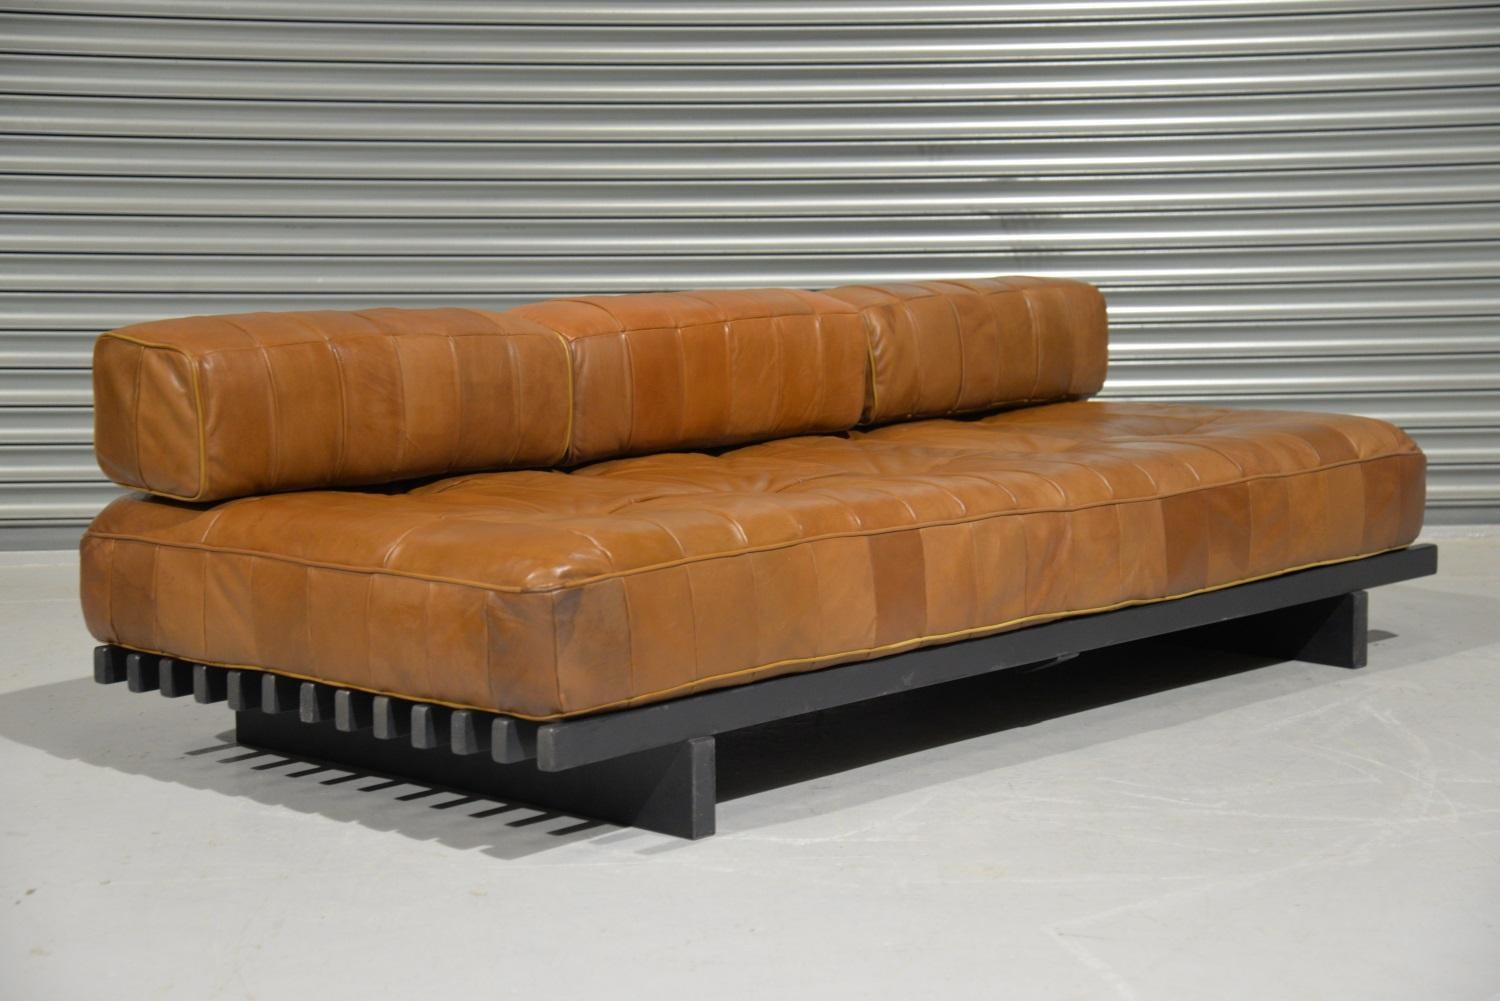 Vintage De Sede DS 80 Leather Patchwork Daybed, Switzerland, 1960s For Sale 2